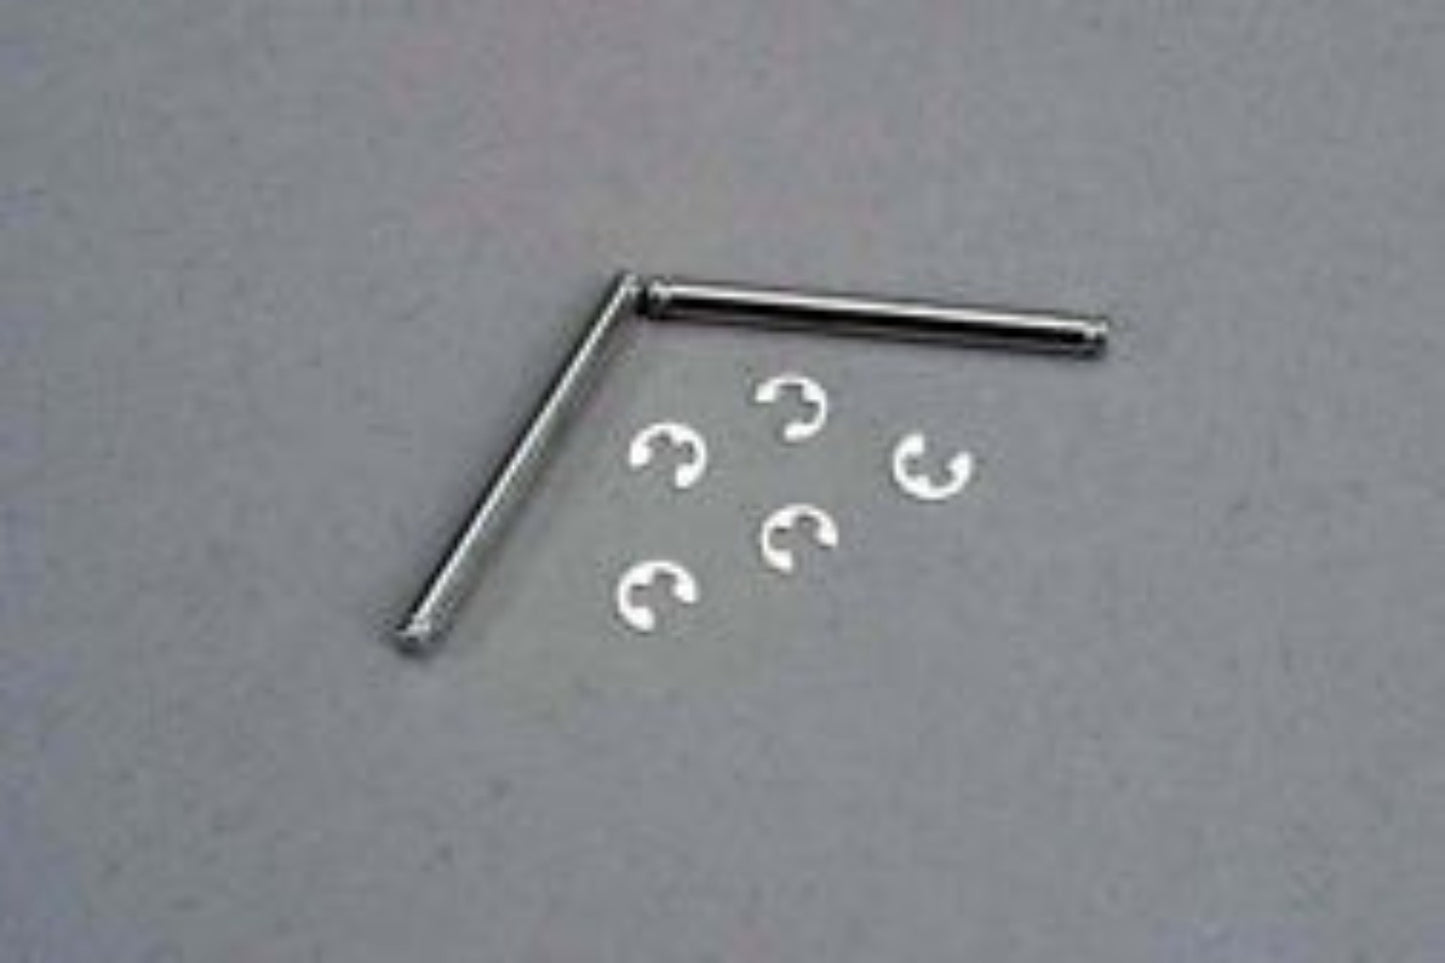 3740 Suspension pins, 2.5x29mm (king pins) w/ e-clips (2) (strengthens caster blocks)